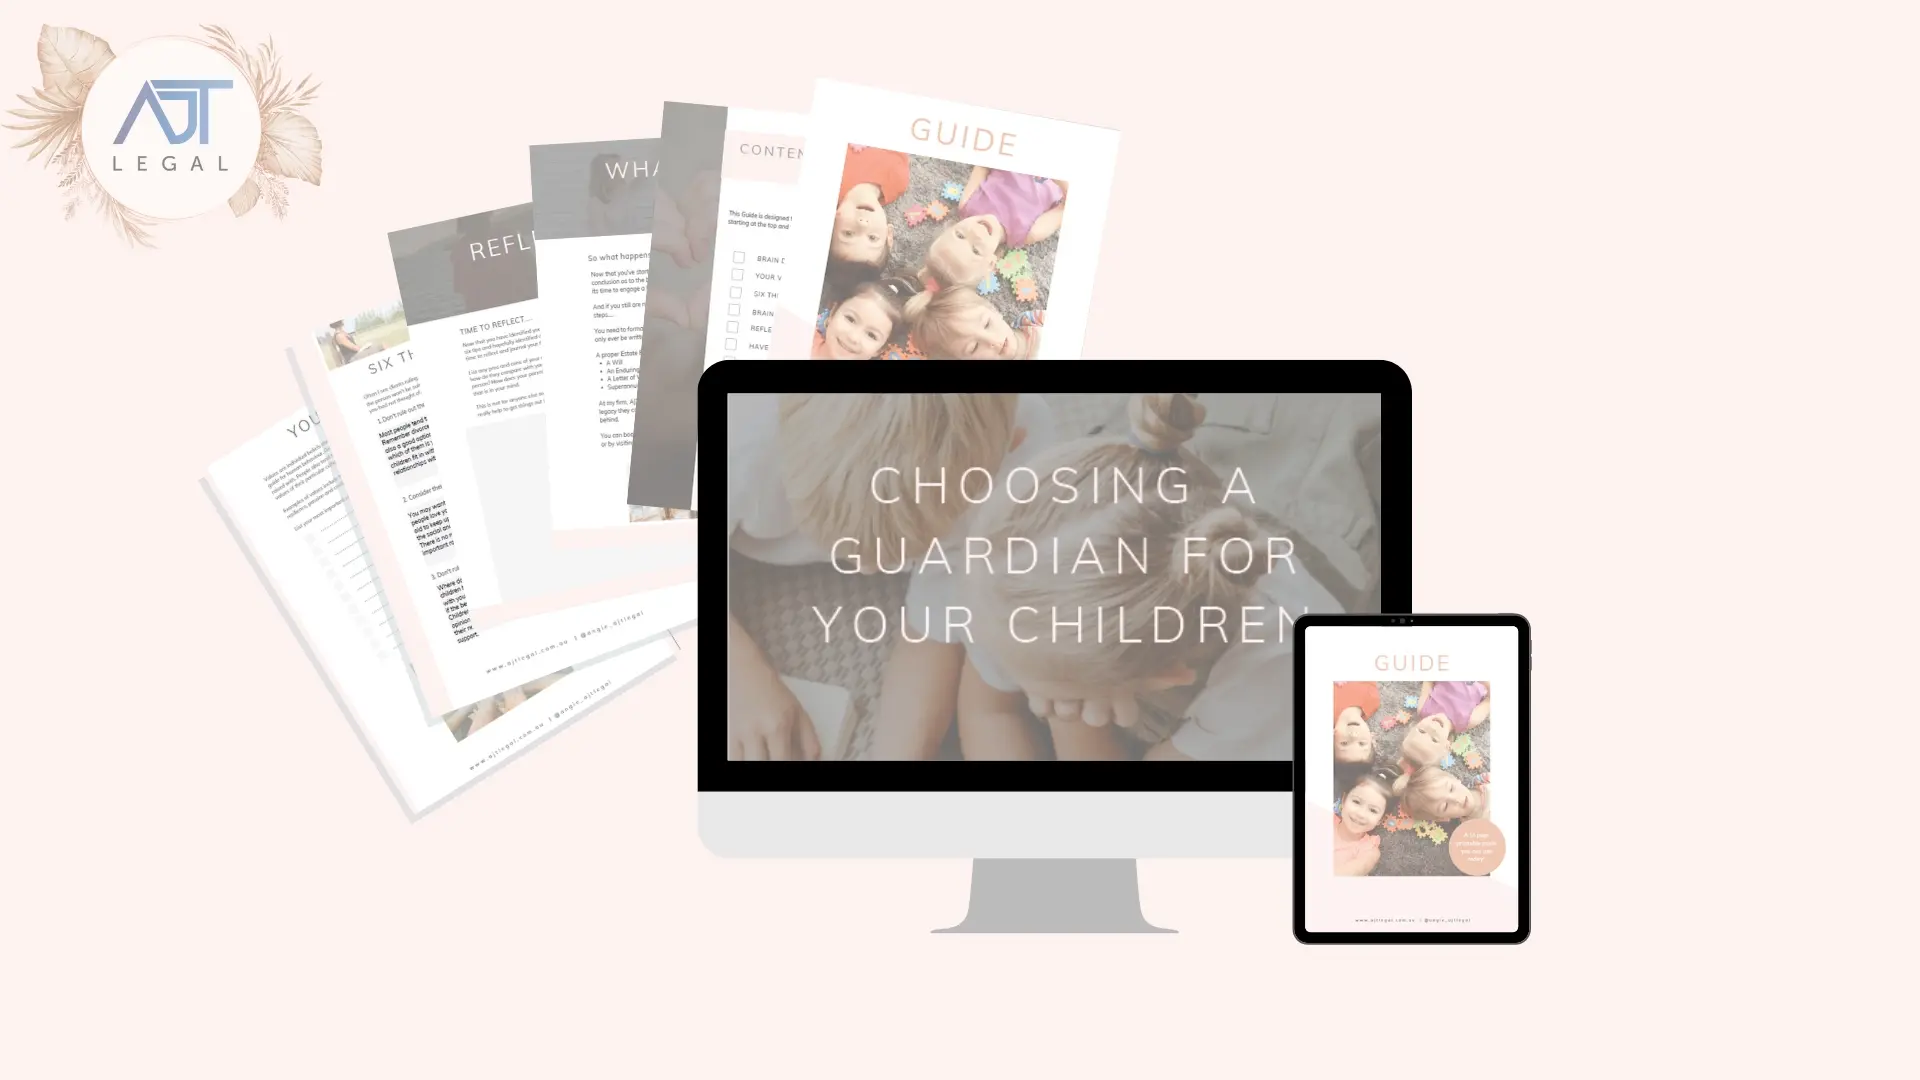 How to choose a guardian for your children workbook